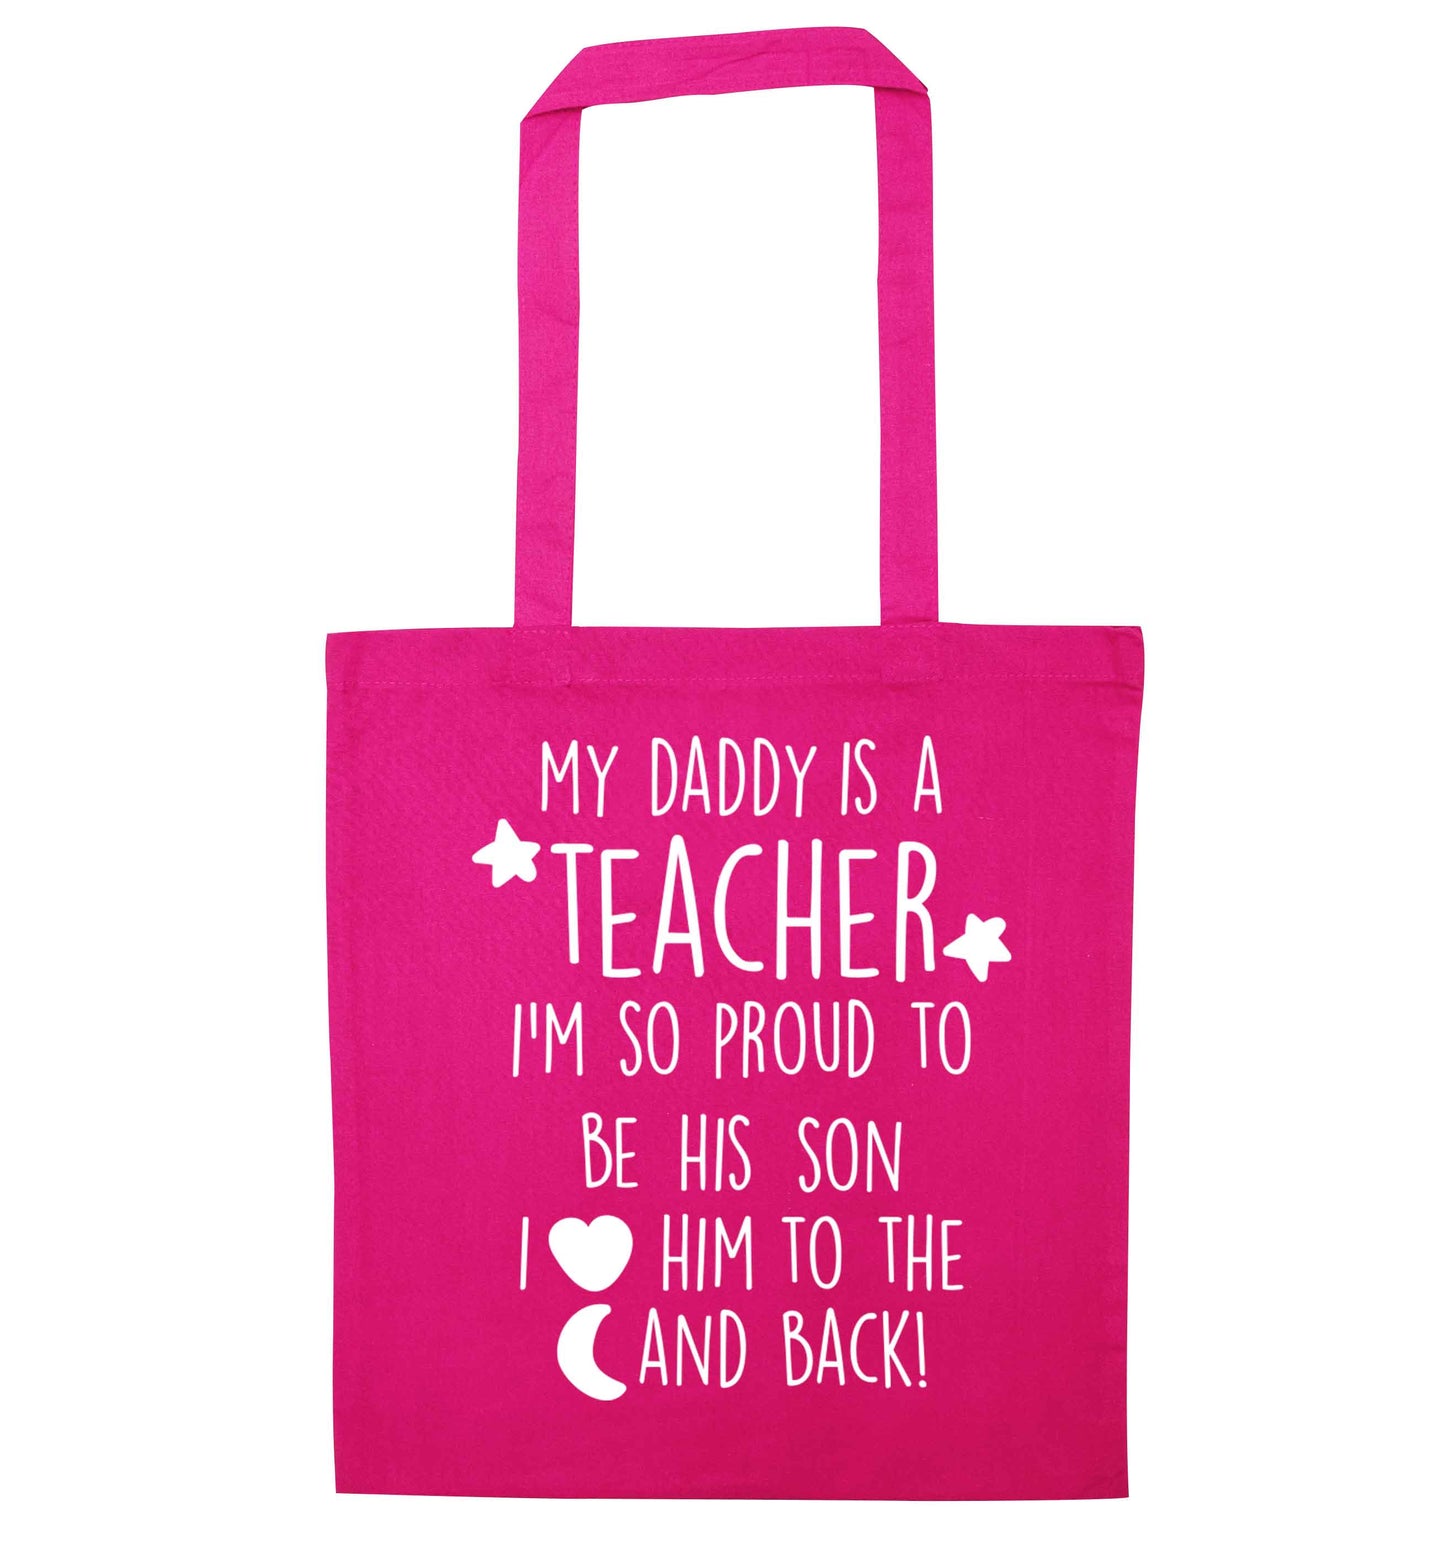 My daddy is a teacher I'm so proud to be his son I love her to the moon and back pink tote bag